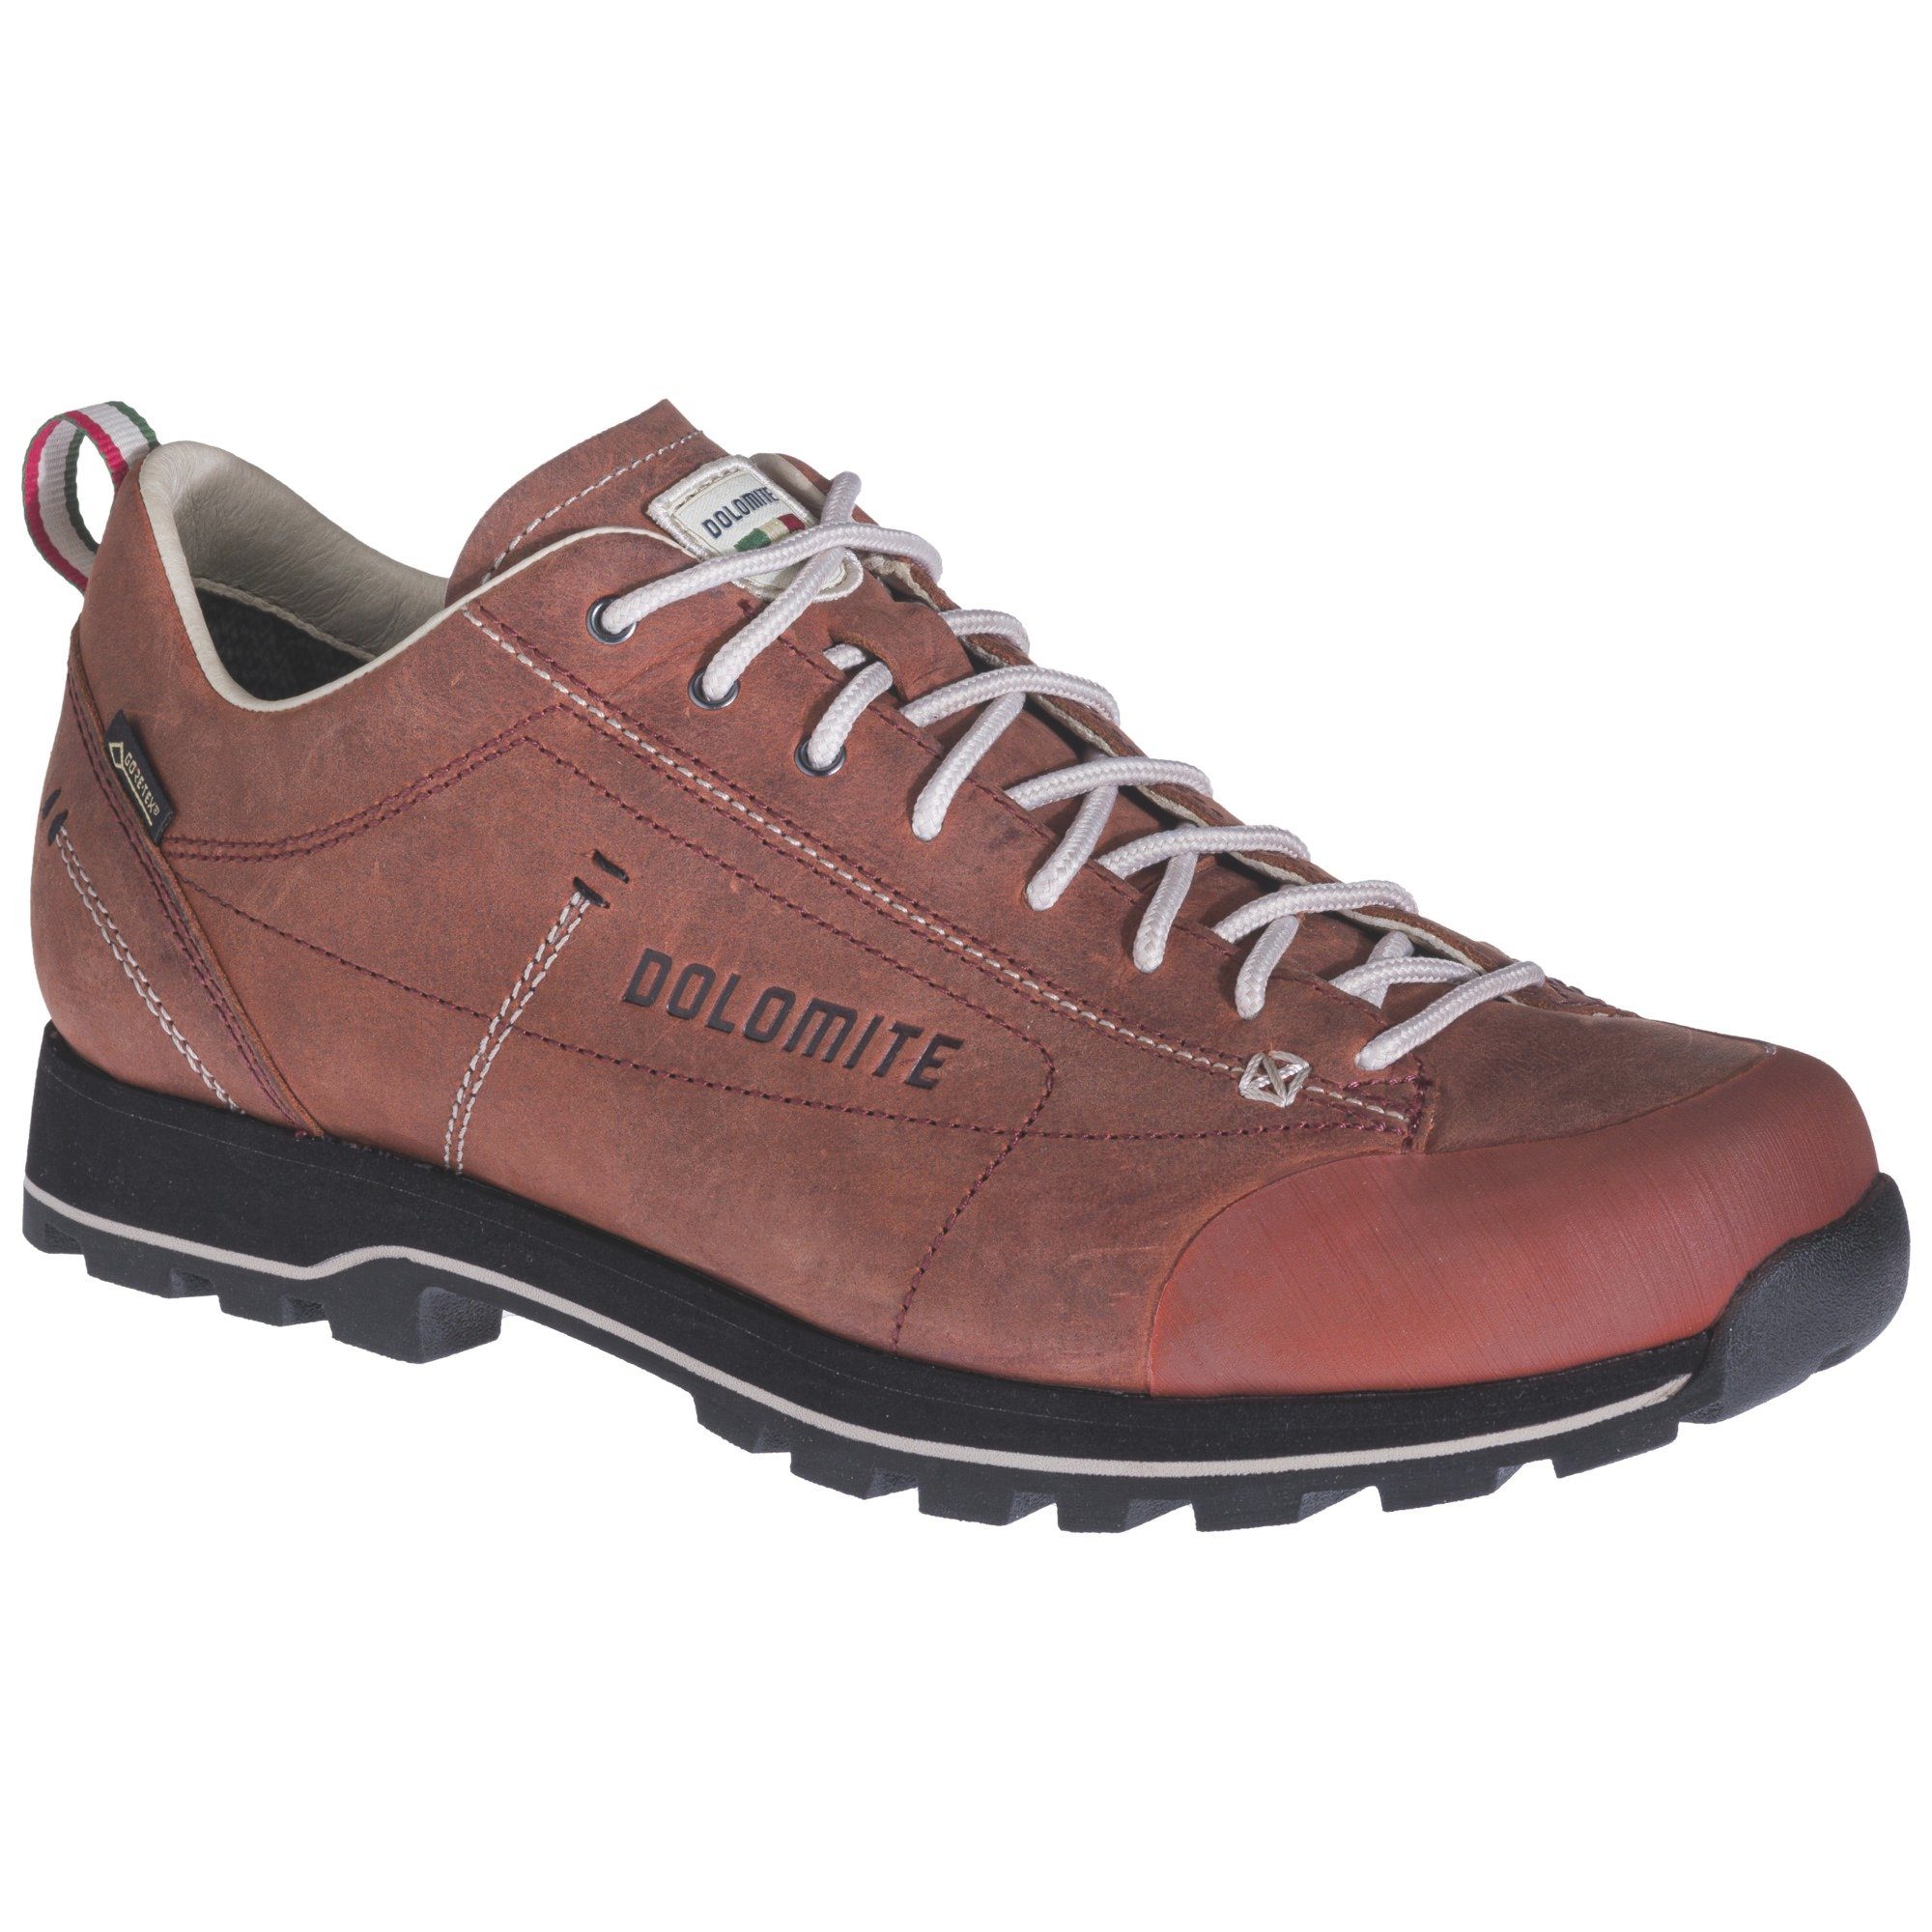 Outdoorschuh Gt Dolomite Ginger Dolomite Cinquantaquattro Fg DOL Low Red Shoe